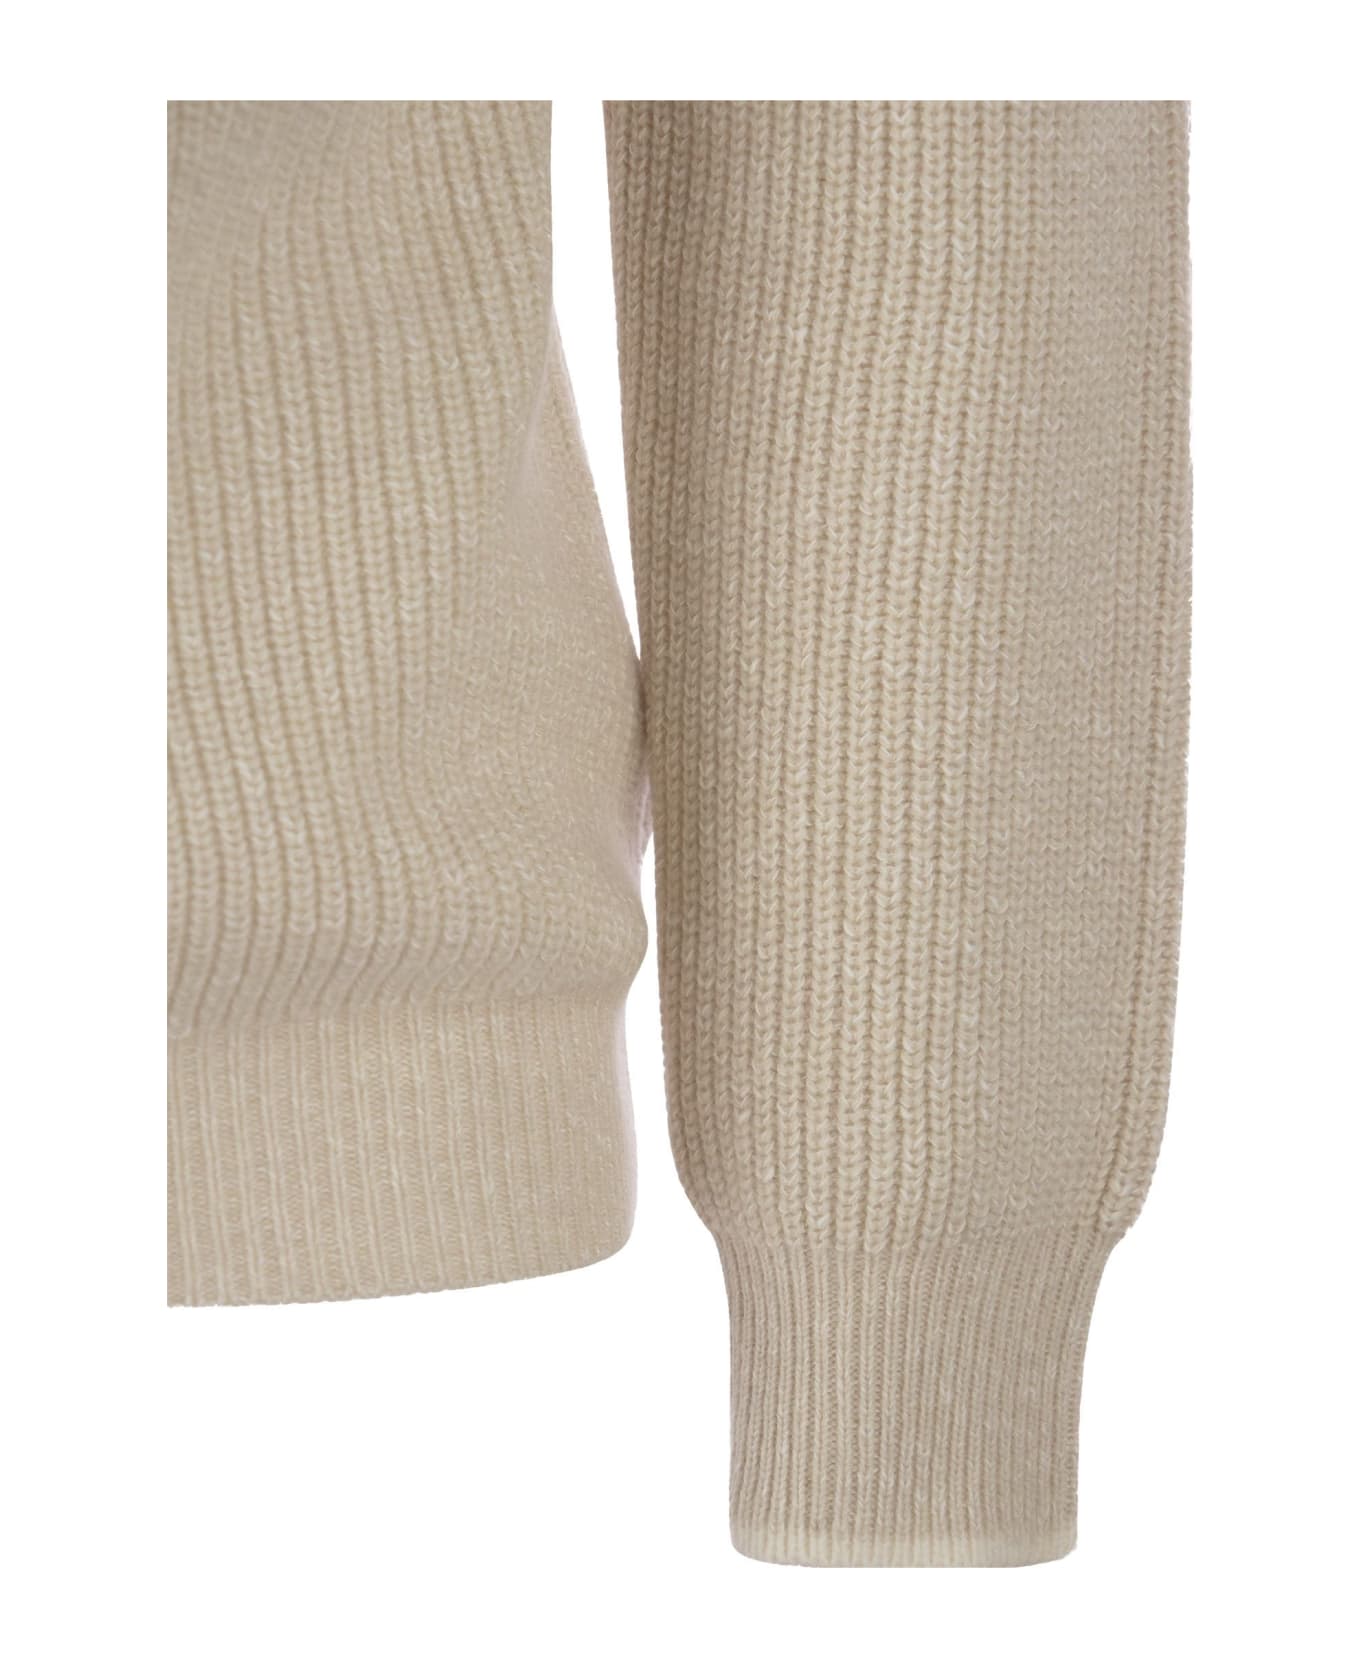 Peserico Crew-neck Sweater In Wool And Cashmere - H Beige+bianco+bianco